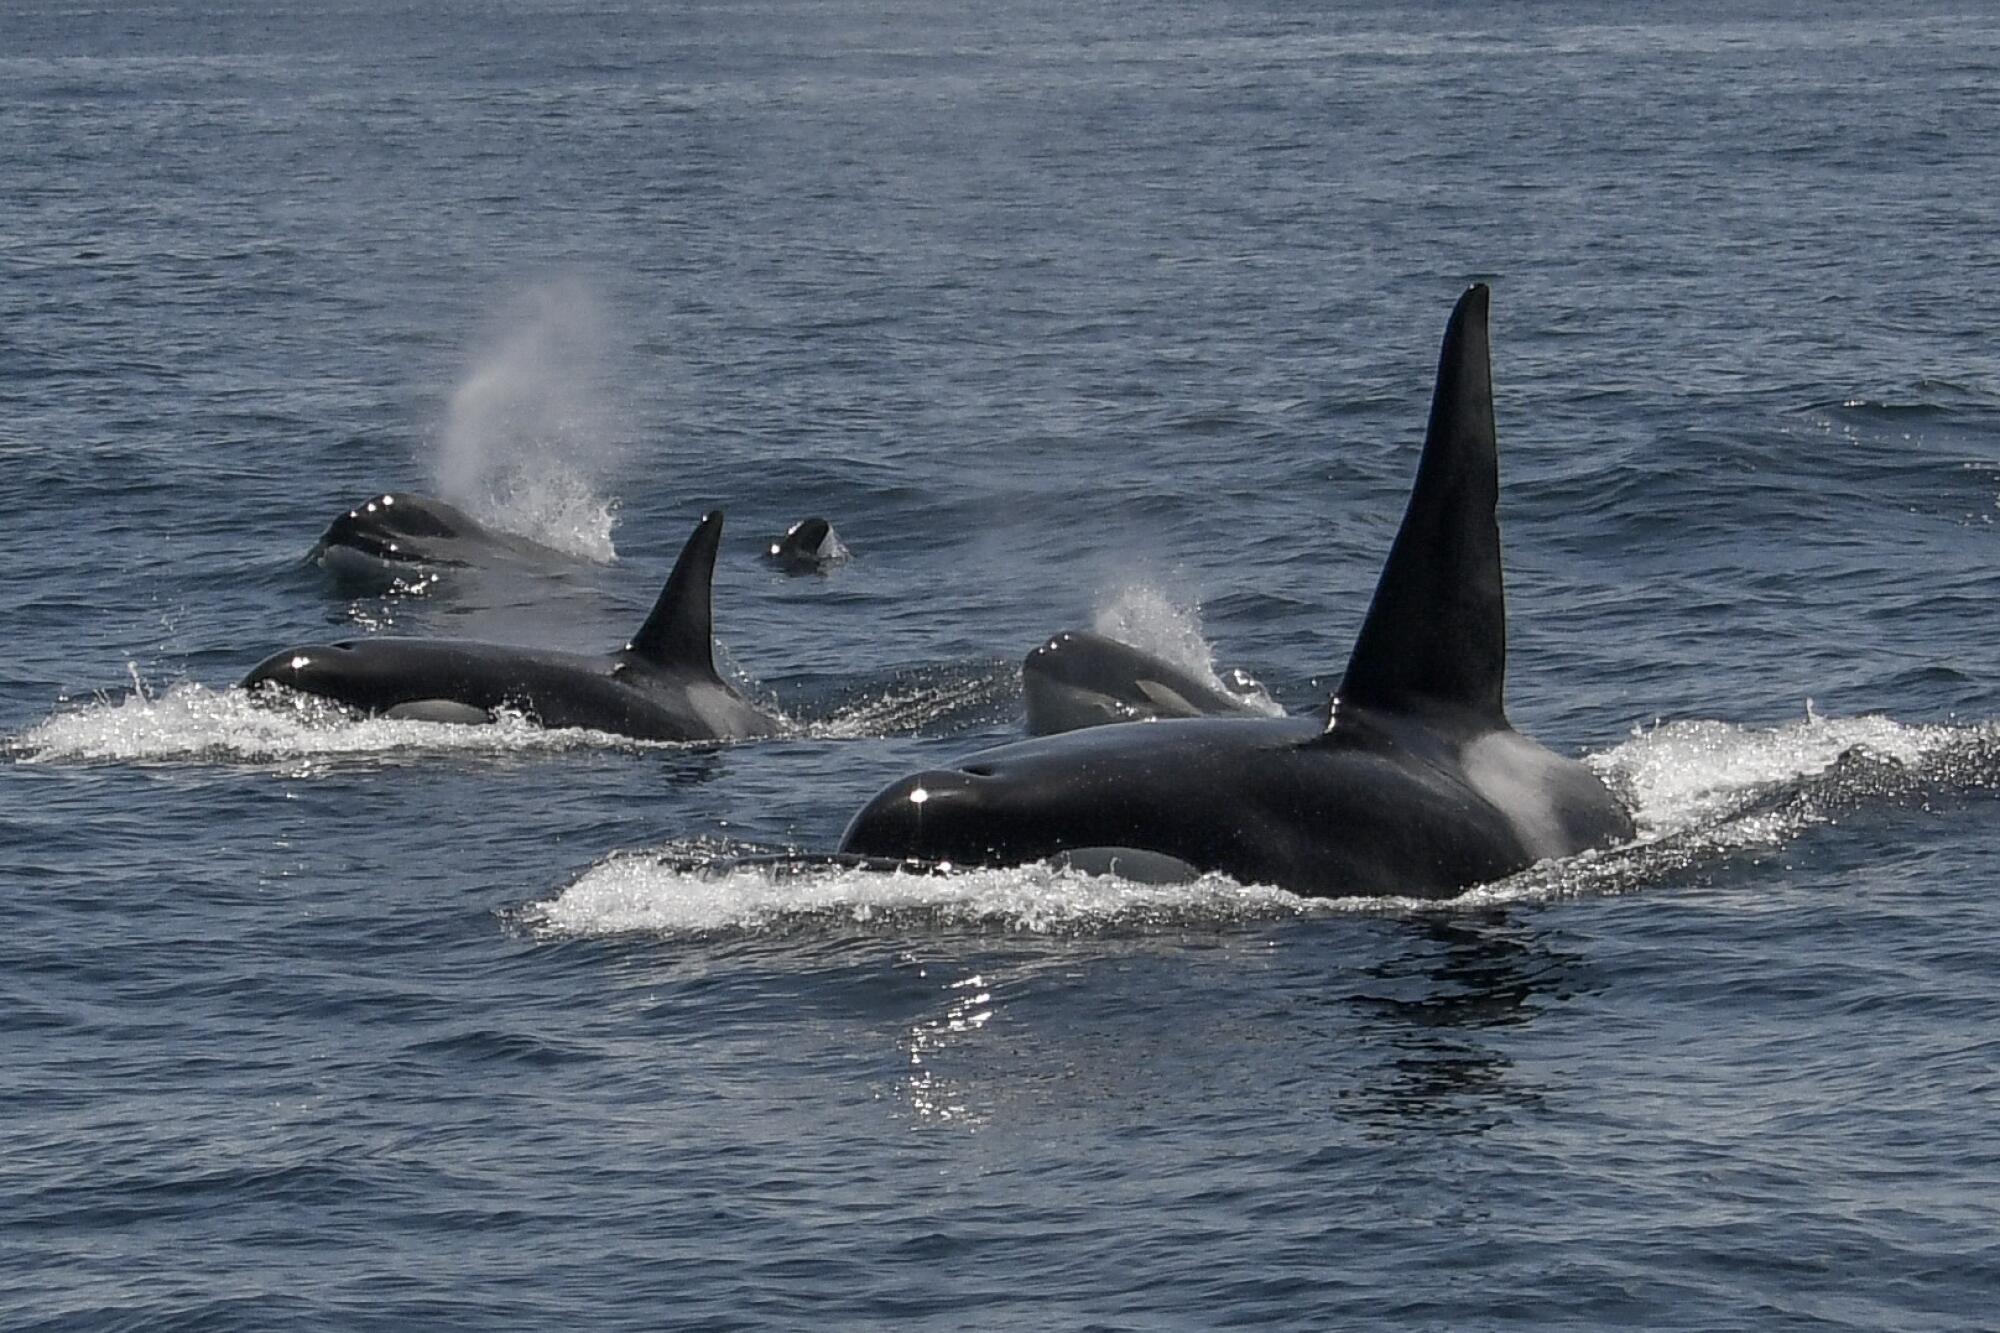 Several orcas surface in the water 